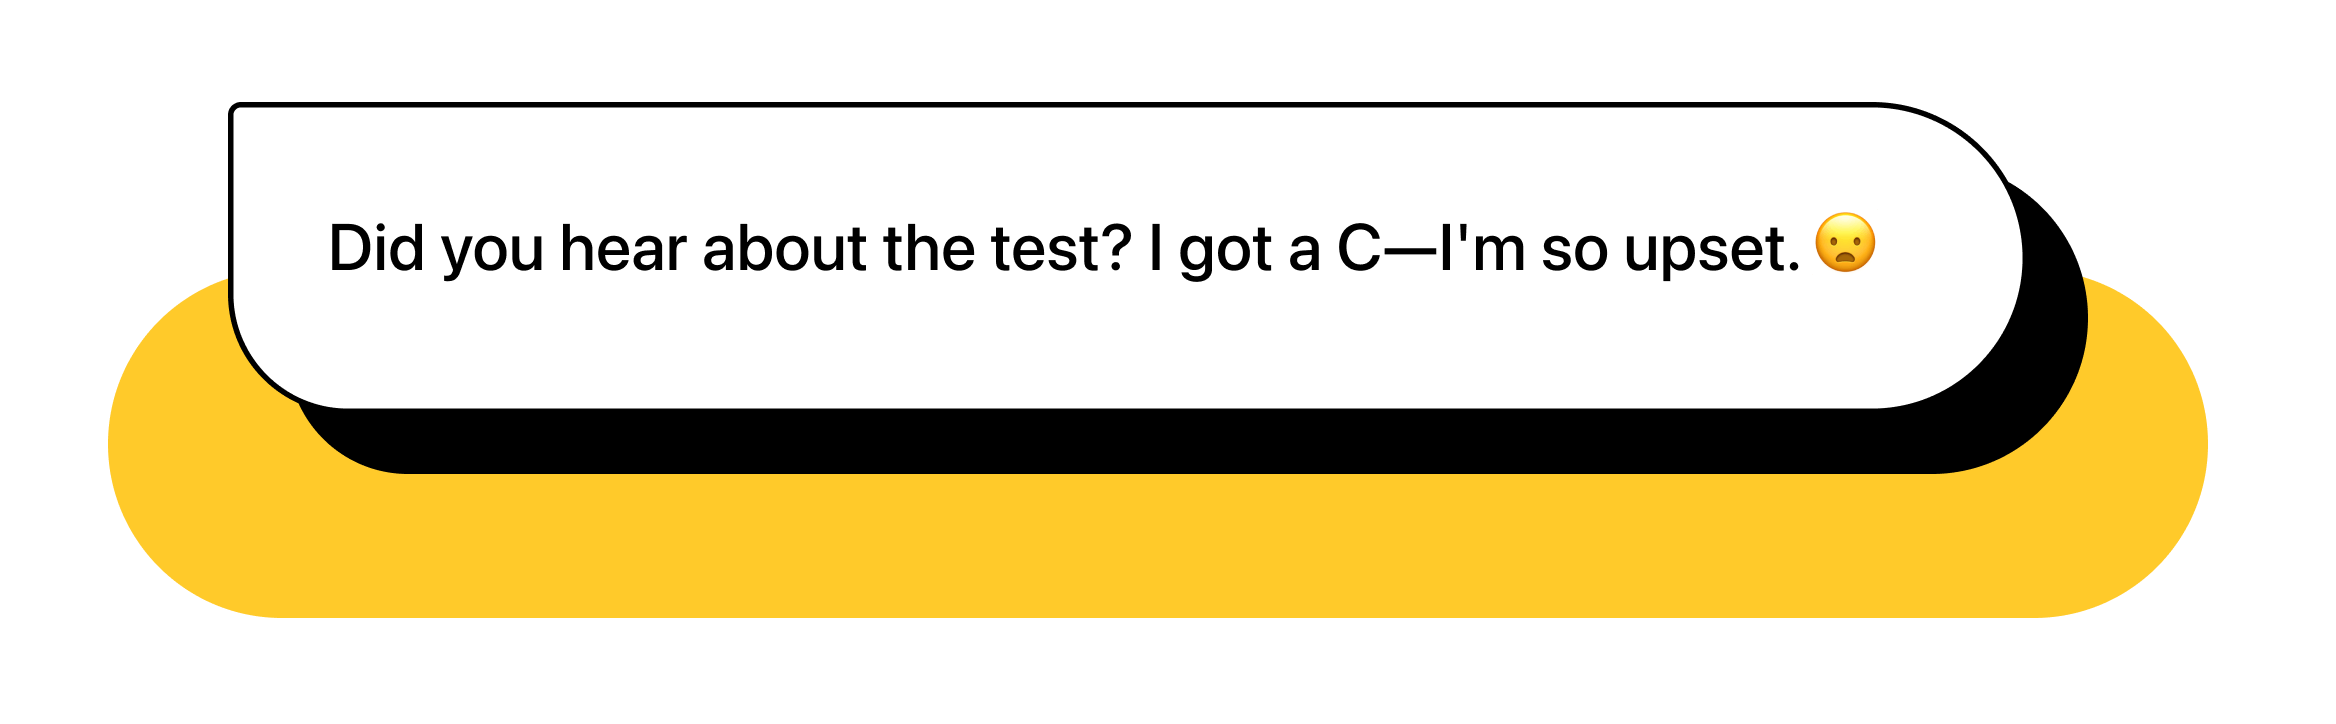 Image of a text message with the words: Did you hear about the test? I got a C—I'm so upset.